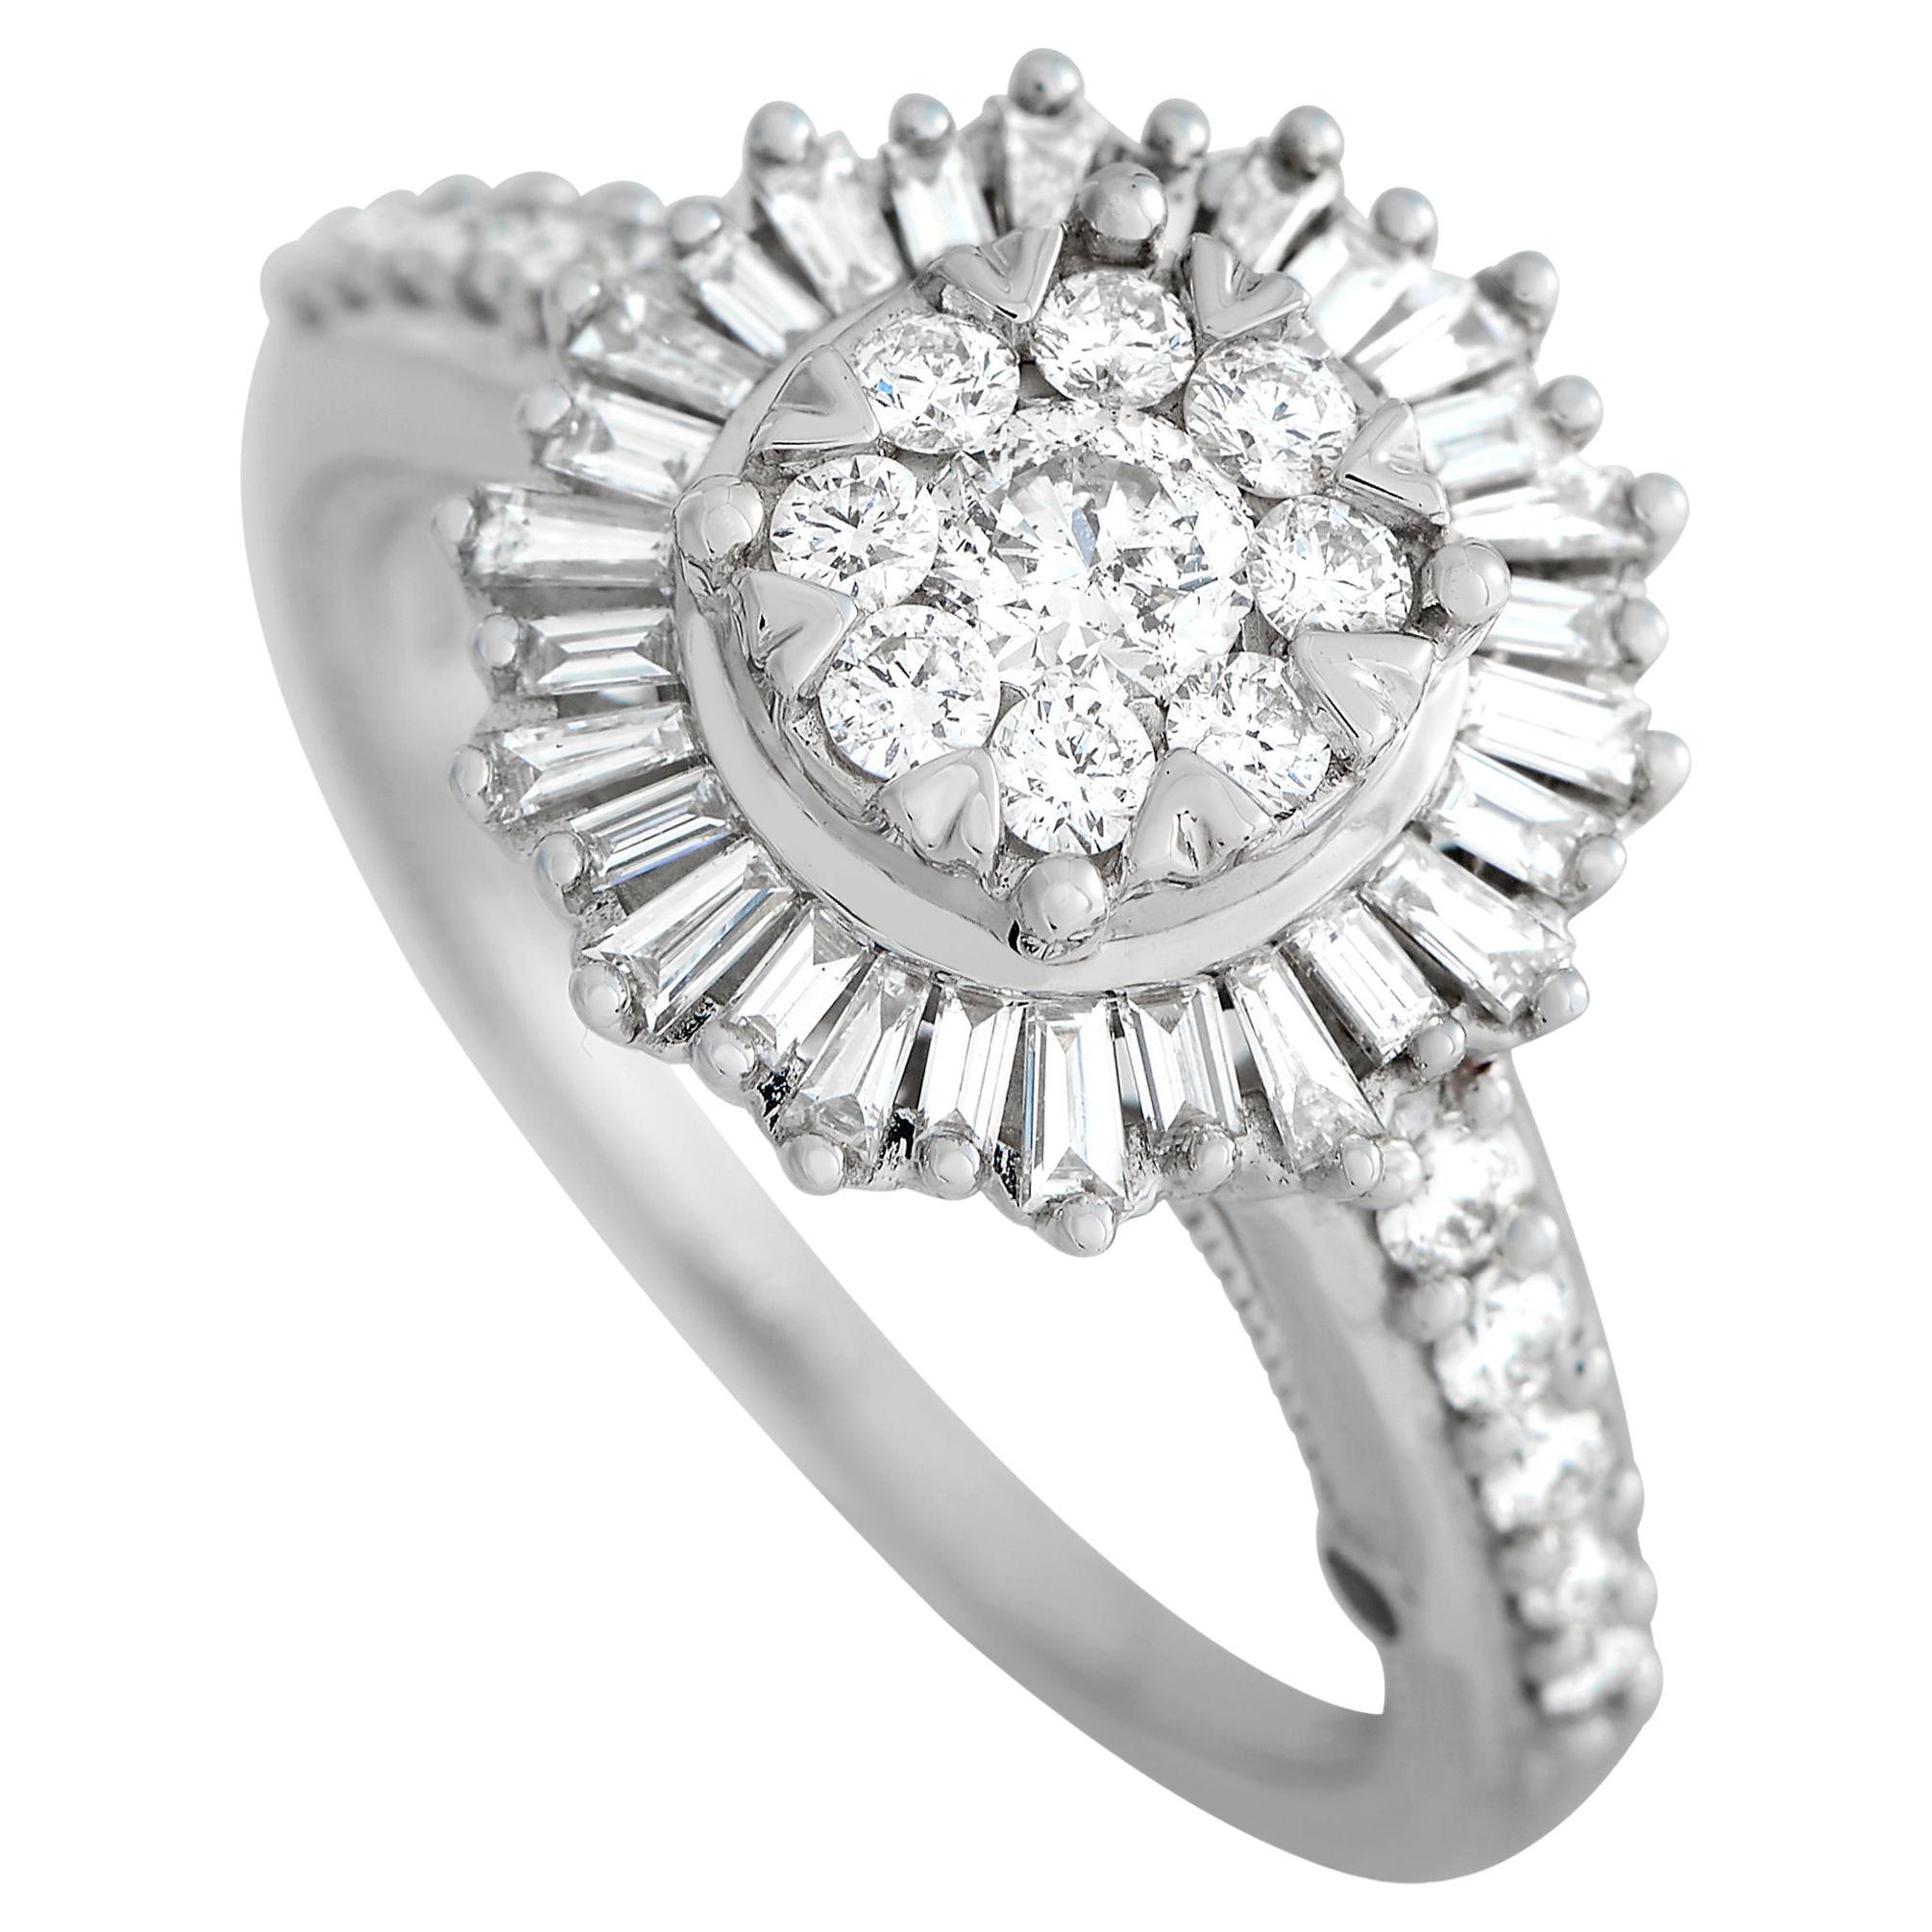 LB Exclusive 14k White Gold 1.0 Carat Diamond Ring For Sale